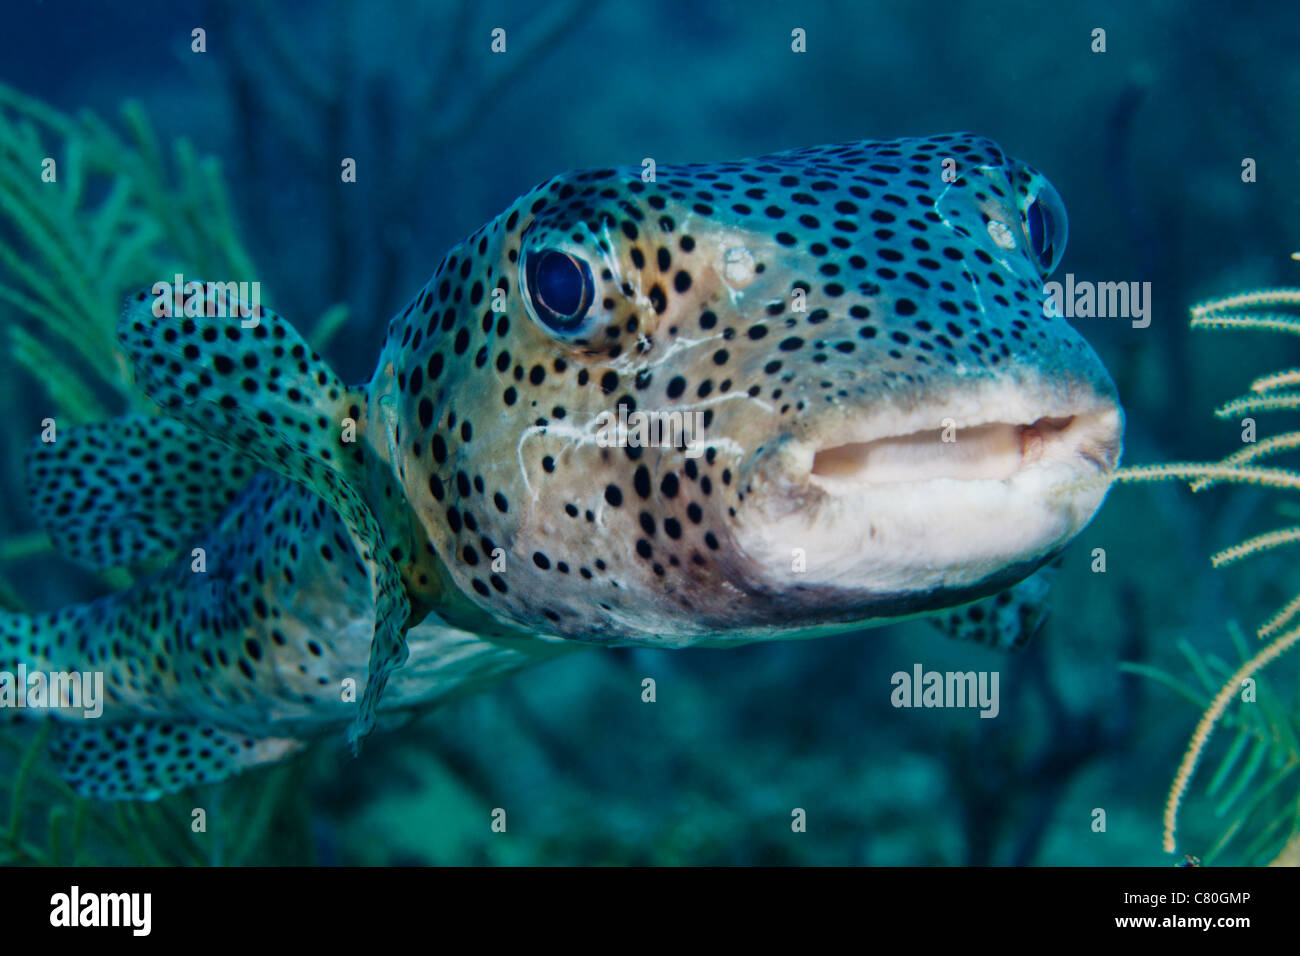 A large spotted pufferfish swims in for a closer look at the photogrpher's camera off the coast of Key Largo, Florida. Stock Photo